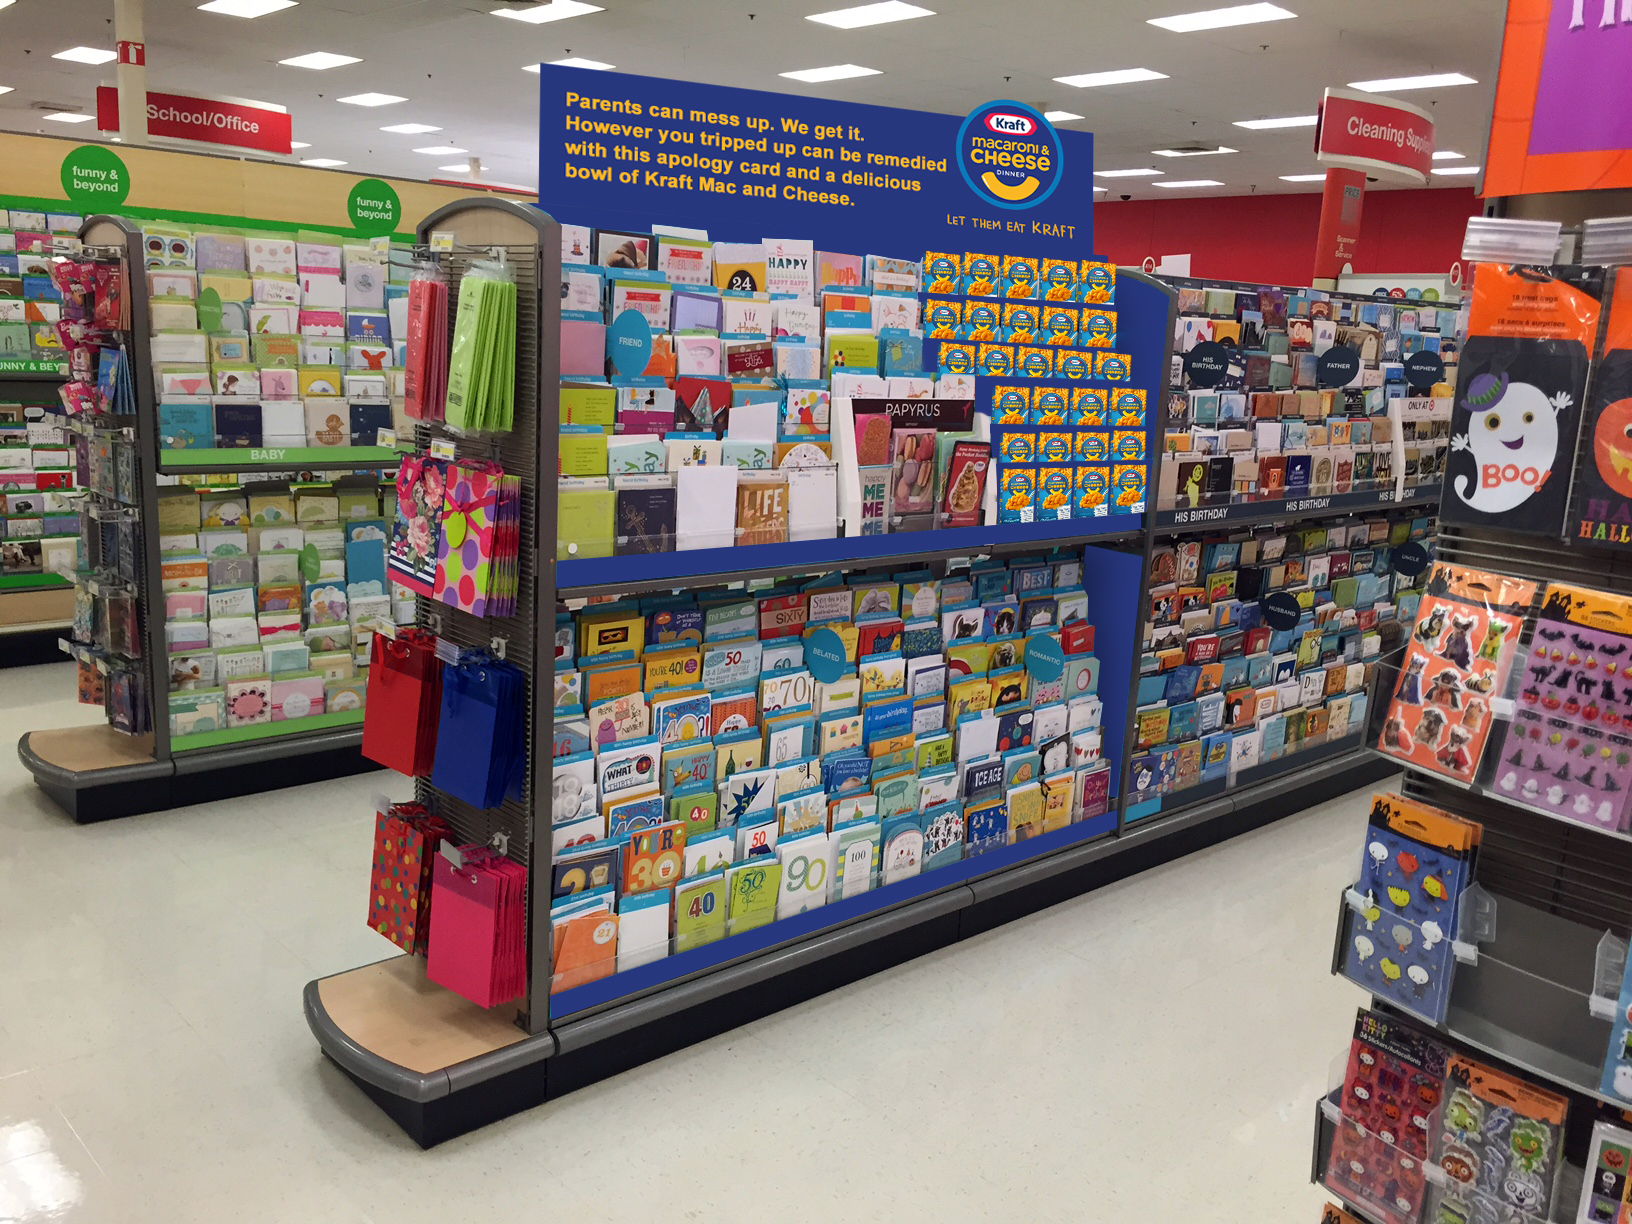  Kraft takes over a section of the greeting card aisle.  